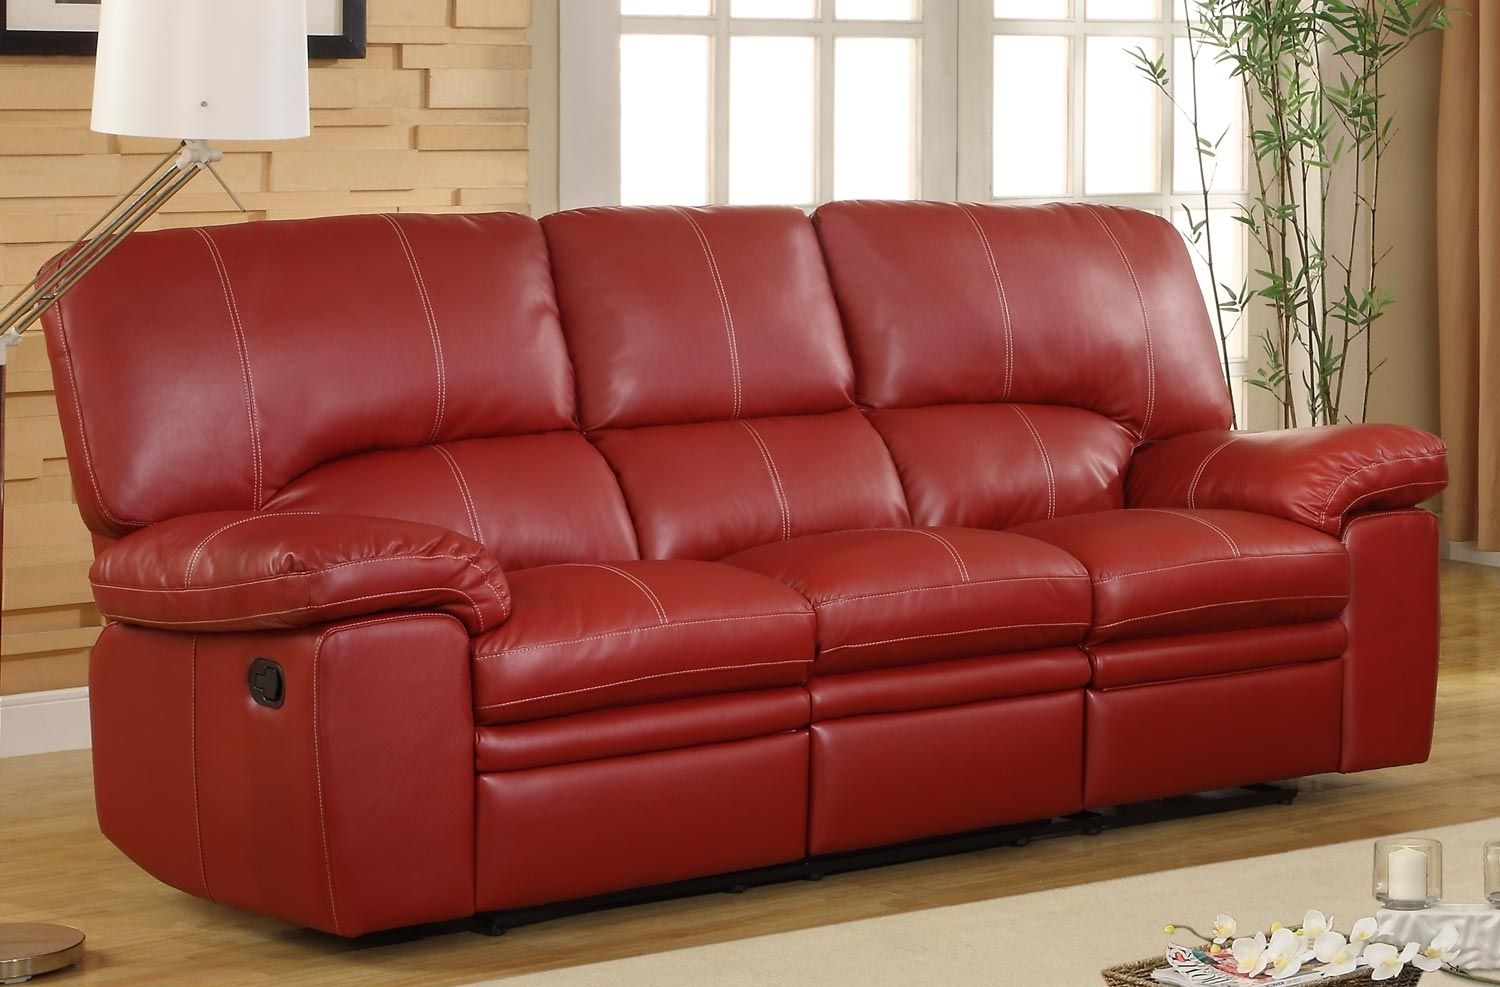 billings red leather reclining sofa